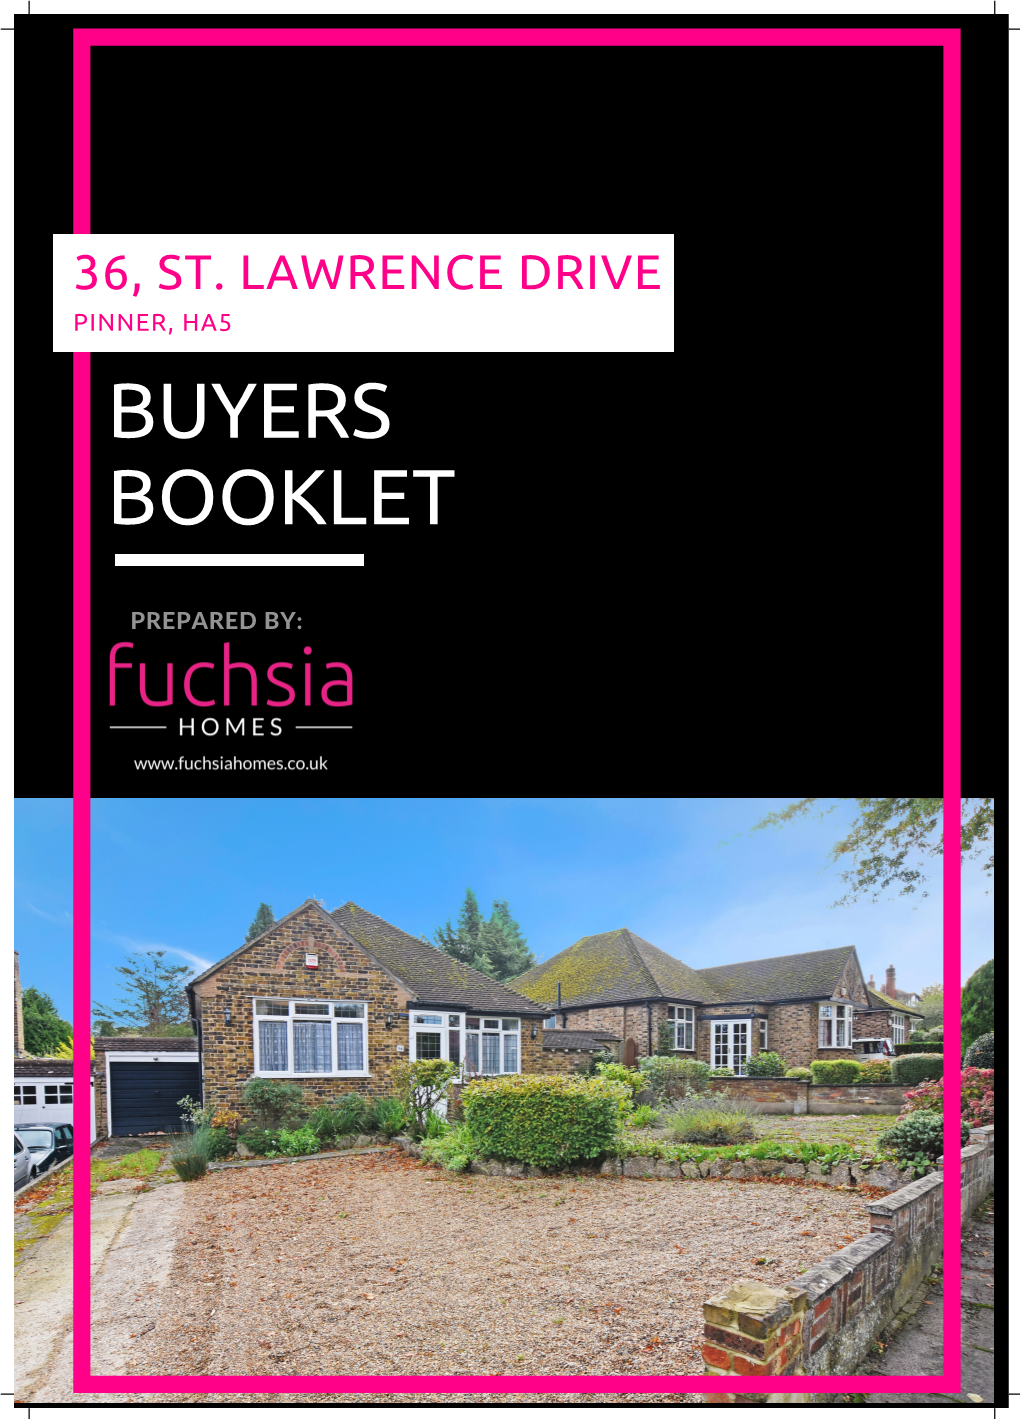 36, St. Lawrence Drive Pinner, Ha5 Buyers Booklet